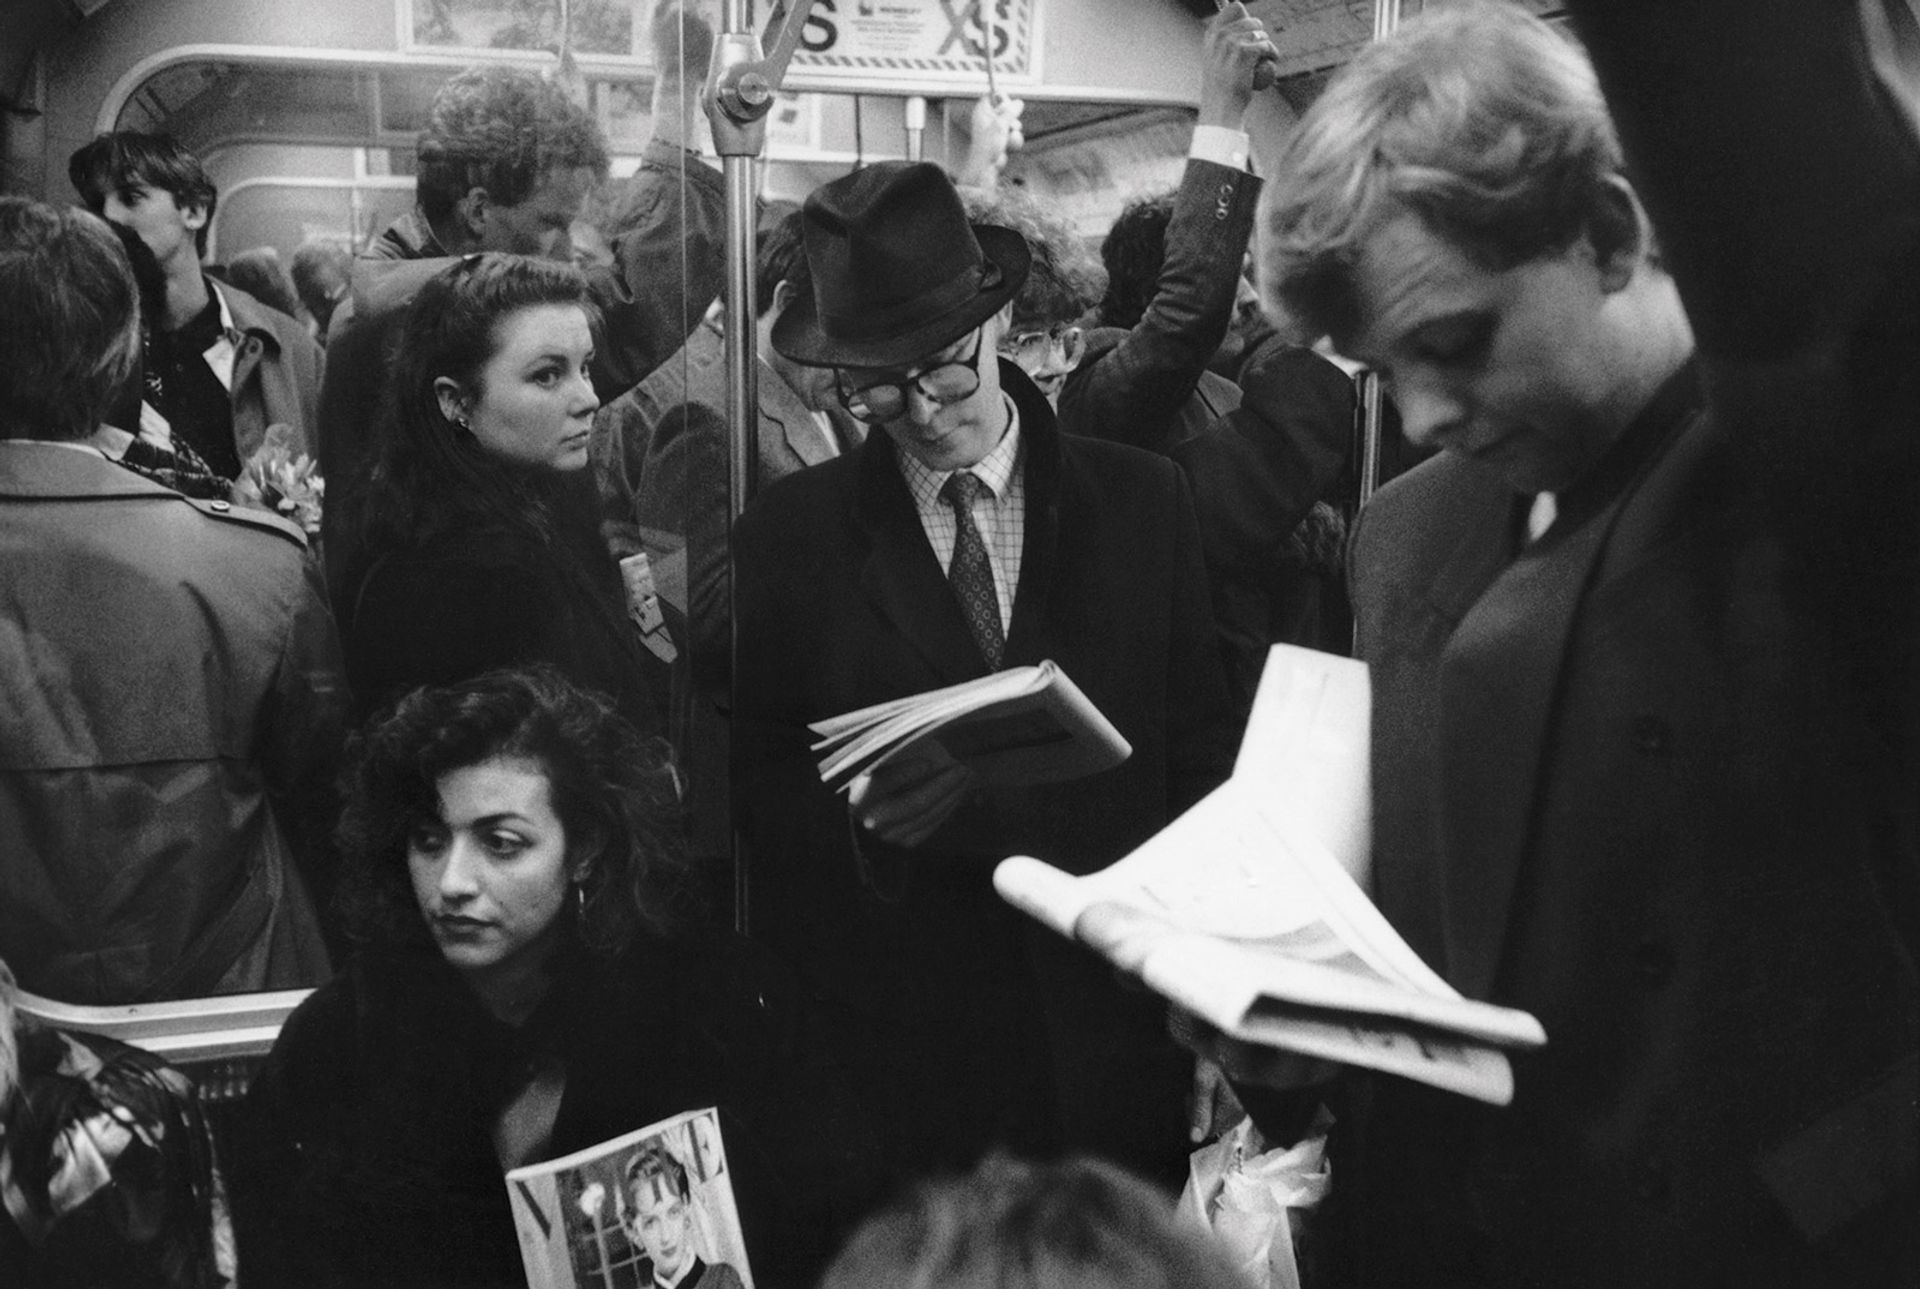 Black and white and read all over: the Underground in 1991, before screens replaced newspapers and magazines Photo: Gideon Mendel/Corbis via Getty Images